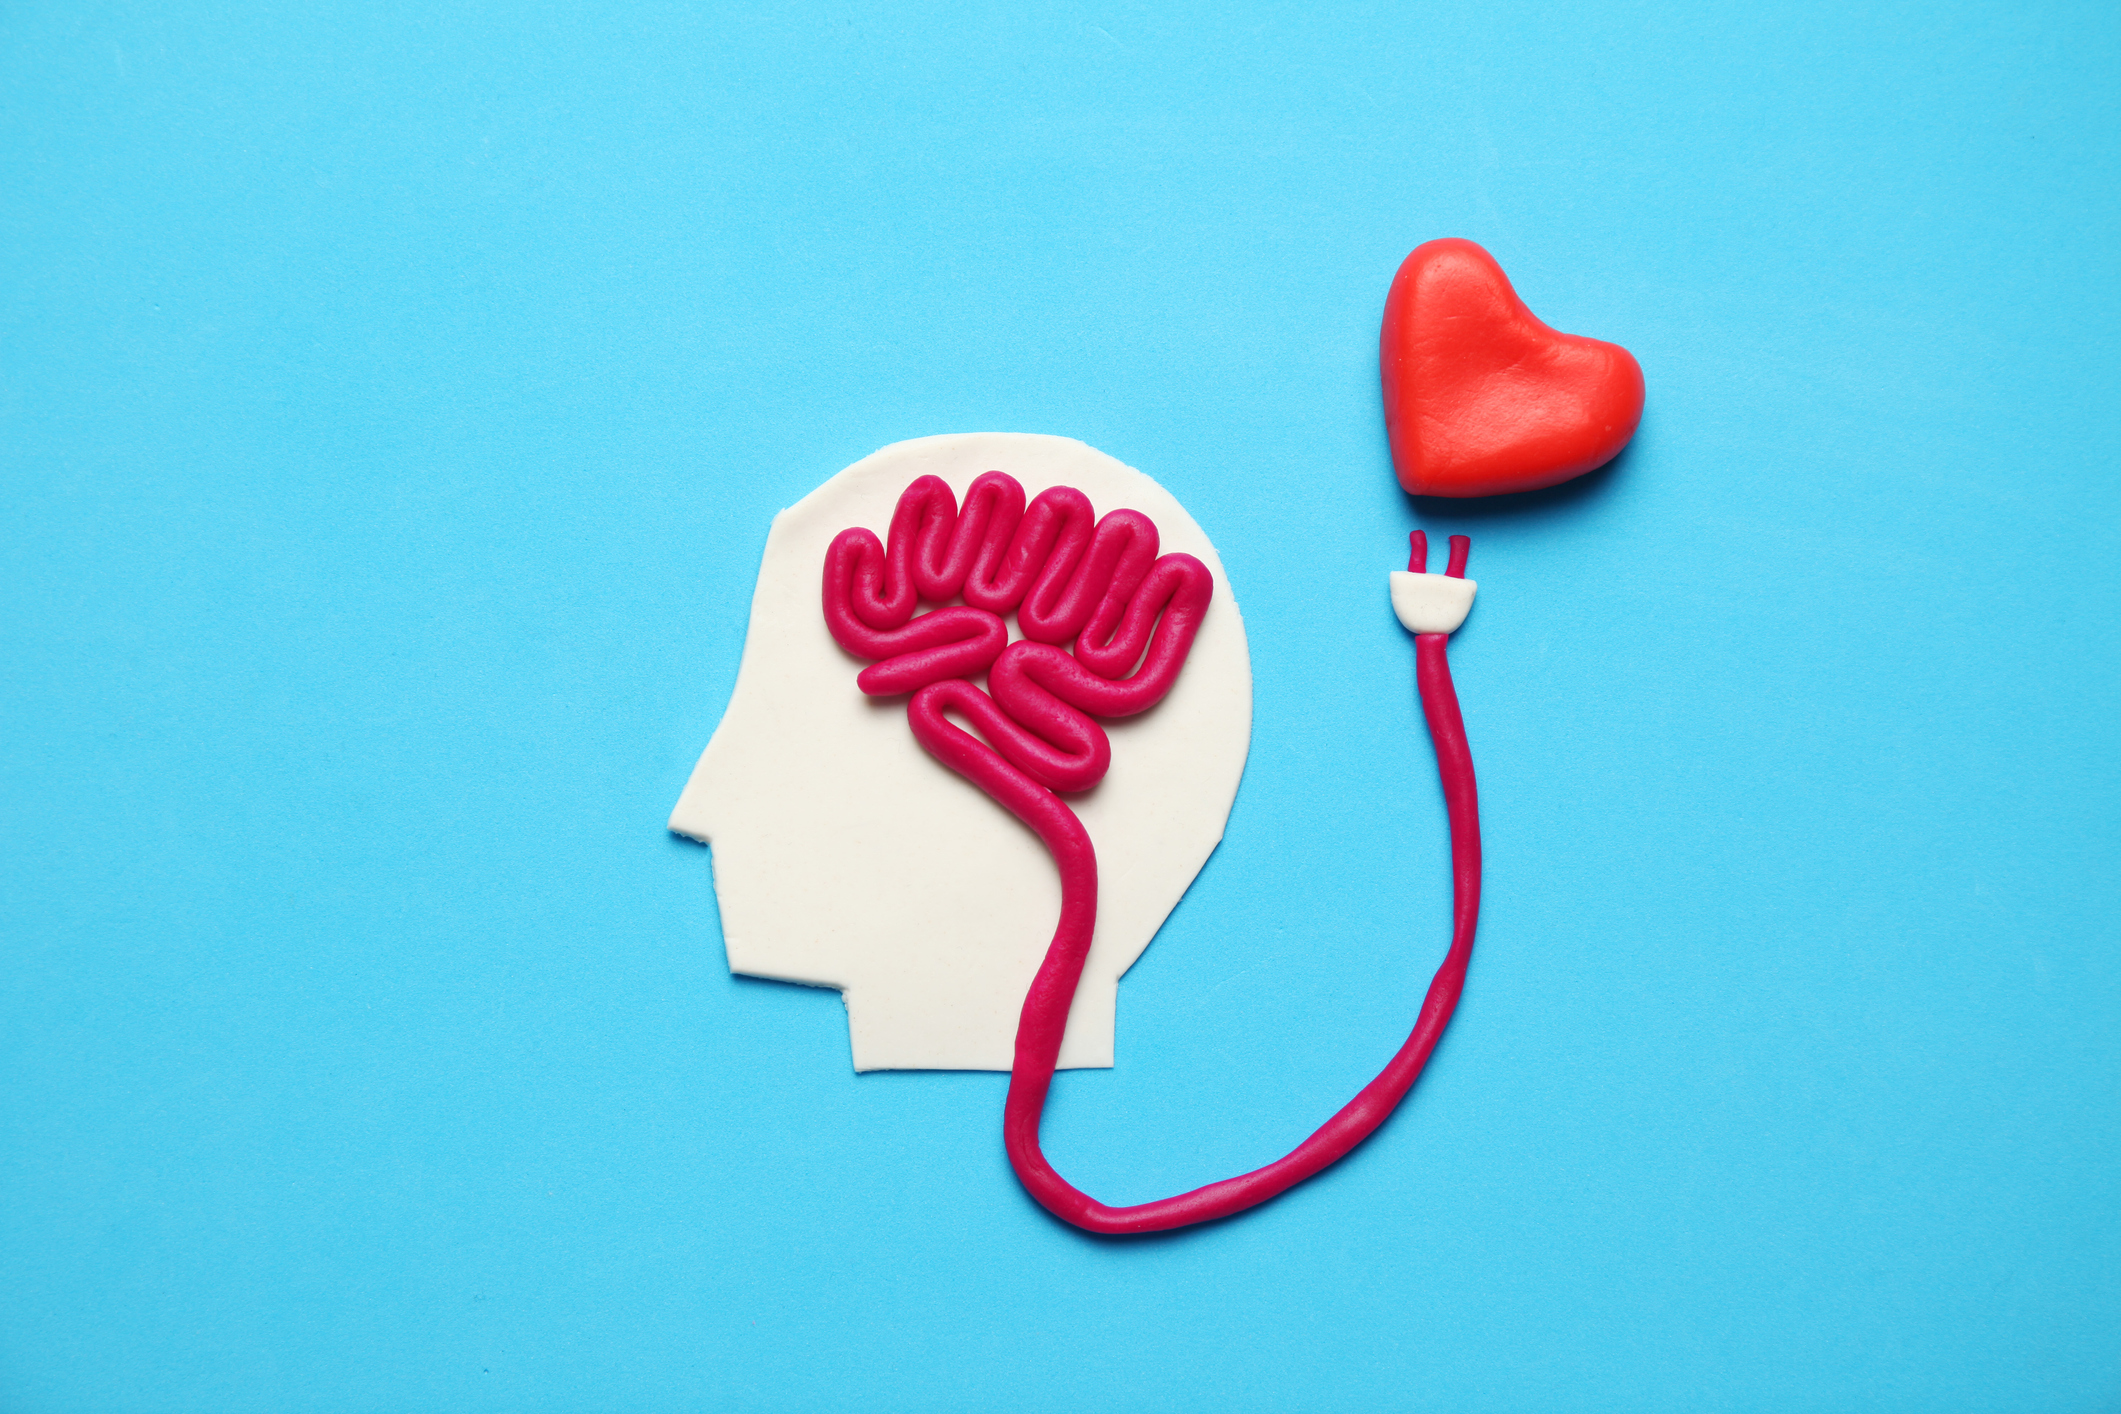 How heart disease can set you up for Alzheimer’s